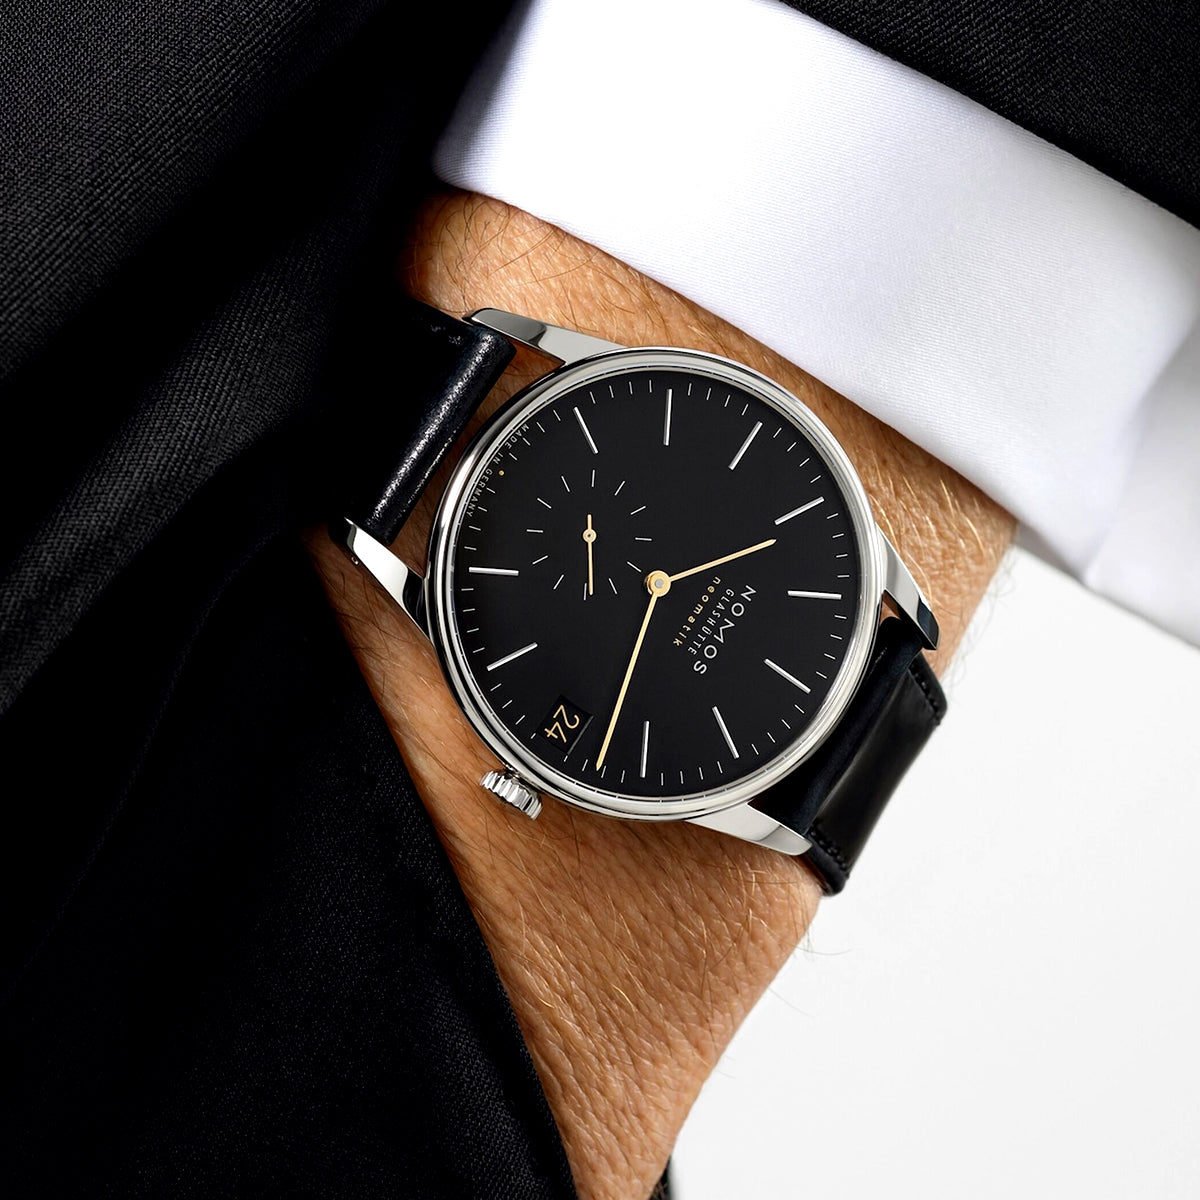 Orion Neomatik Date 41mm Black/Gold Dial Automatic Watch